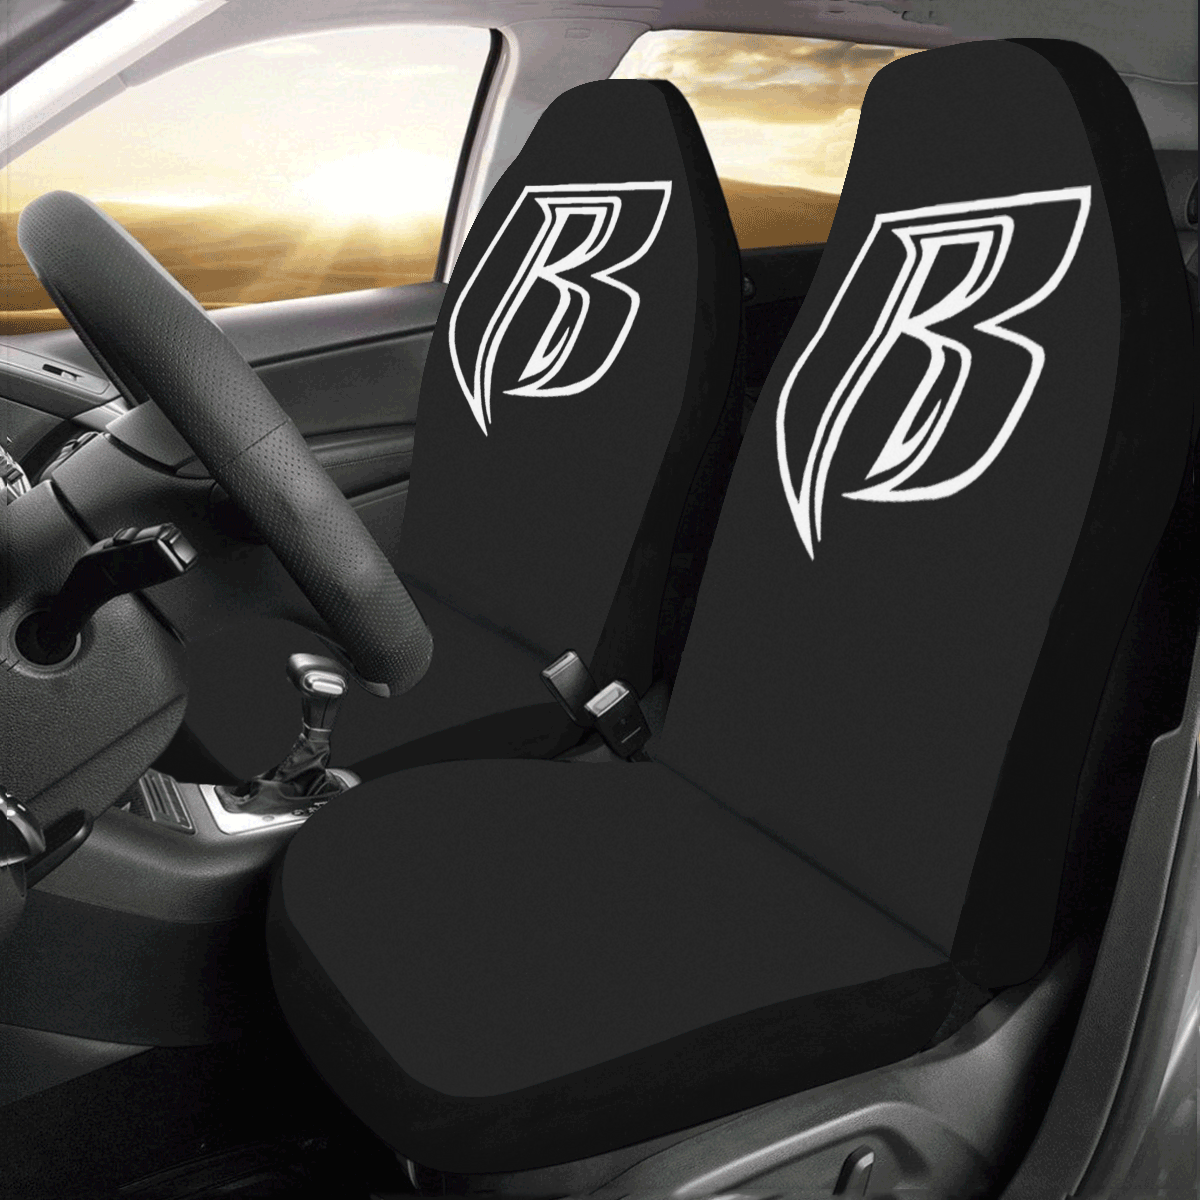 White RR Car Seat Covers (Set of 2)